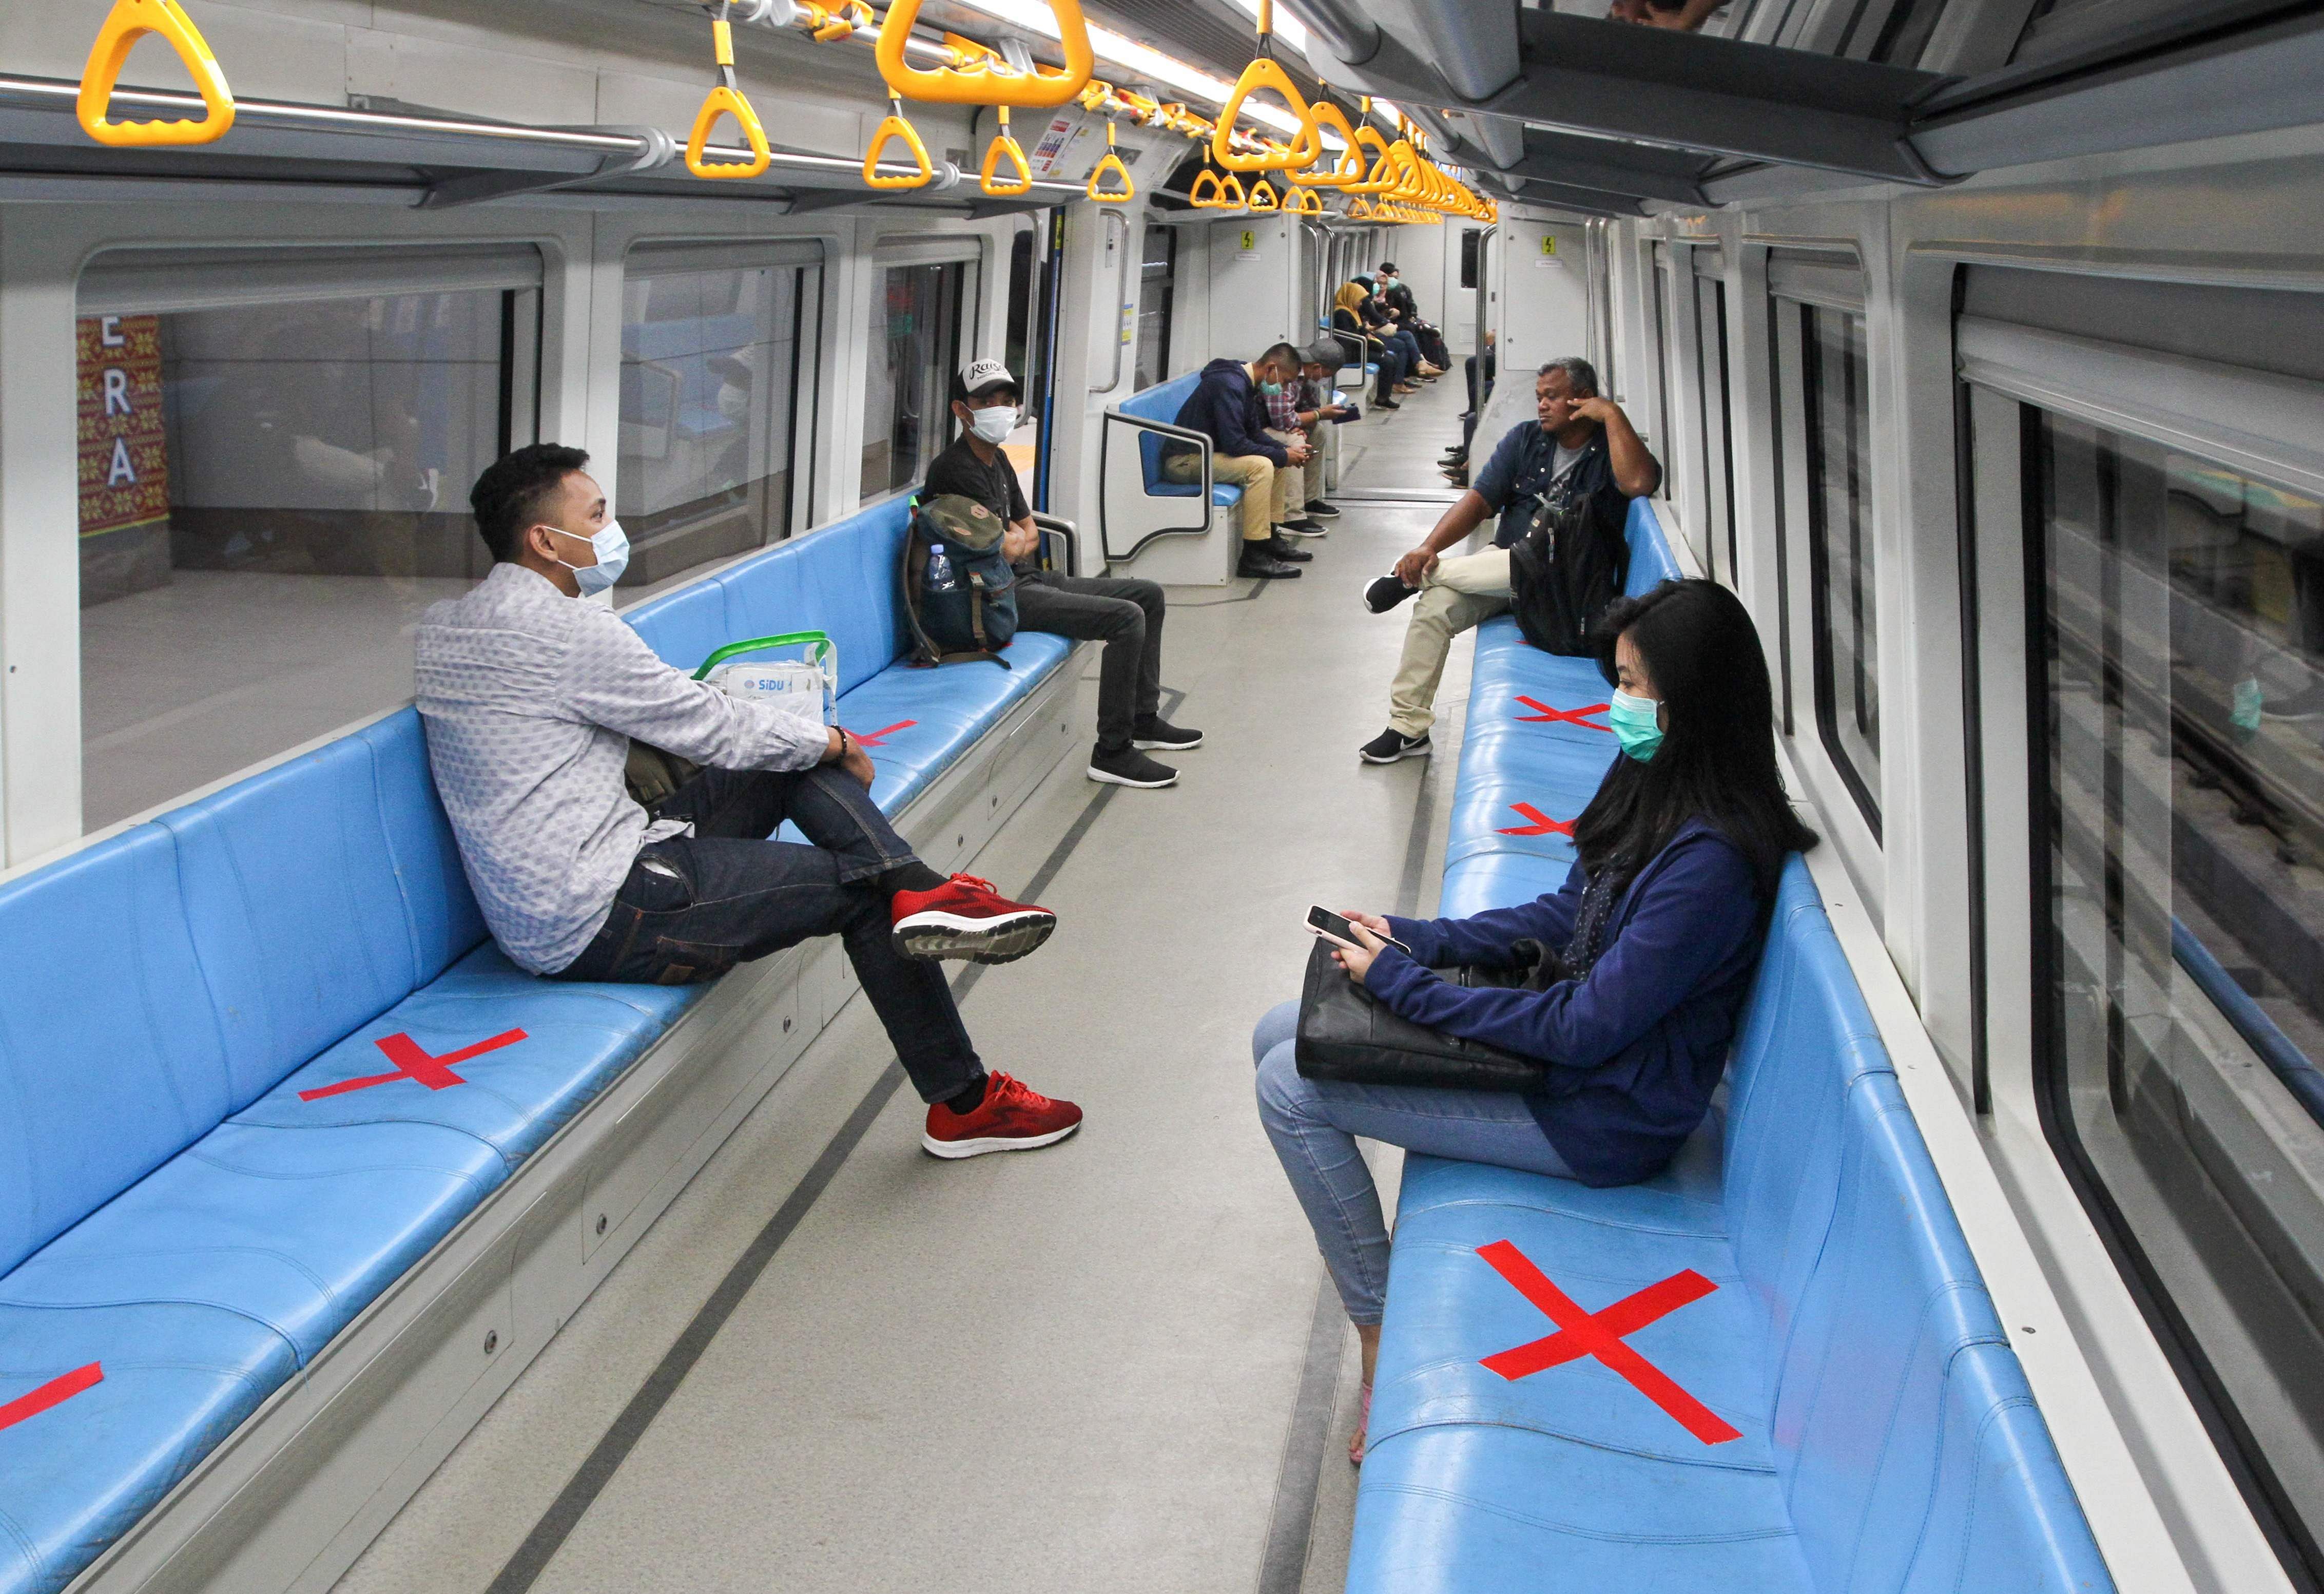 People sit on designated areas decided by red cross marks to ensure social distancing inside a light rapid transit train in Palembang, South Sumatra on March 20, 2020, amid concerns of the COVID-19 coronavirus outbreak.. (AFP Photo)